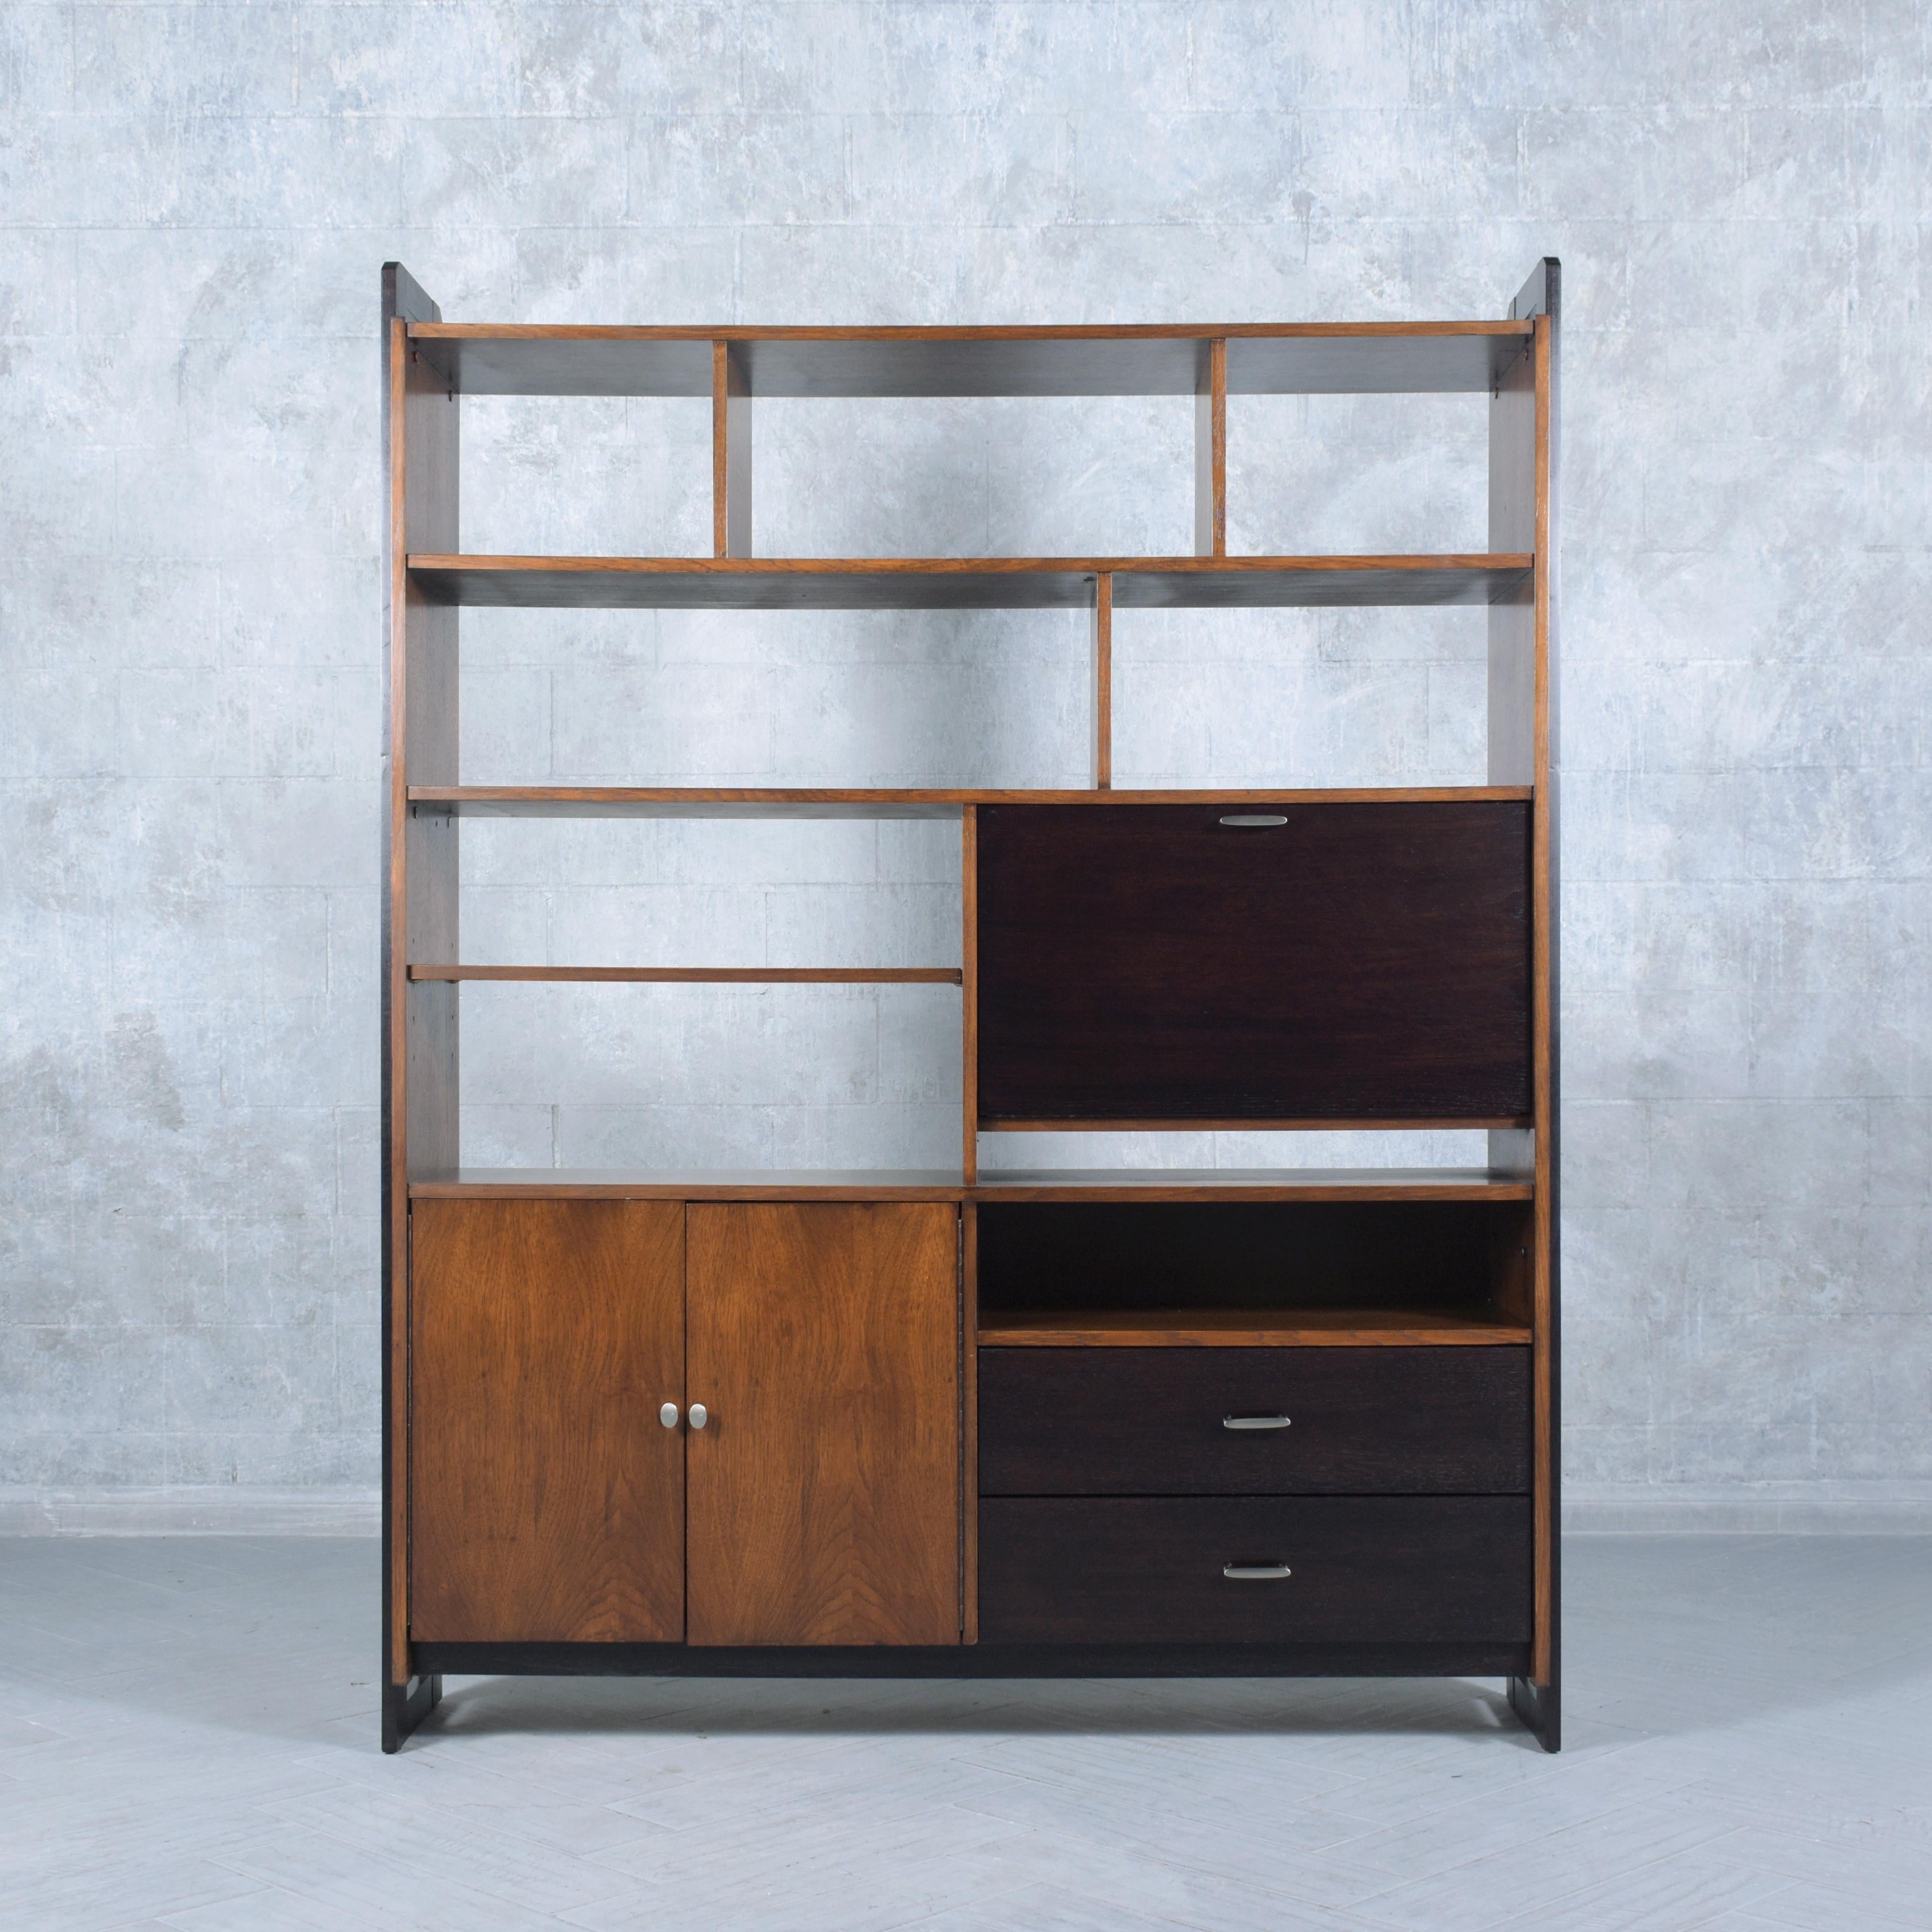 Transform your space with our vintage mid-century modern bookshelf, a masterpiece of design and functionality. Handcrafted with meticulous attention to detail, this bookshelf is made from premium walnut wood, known for its durability and rich